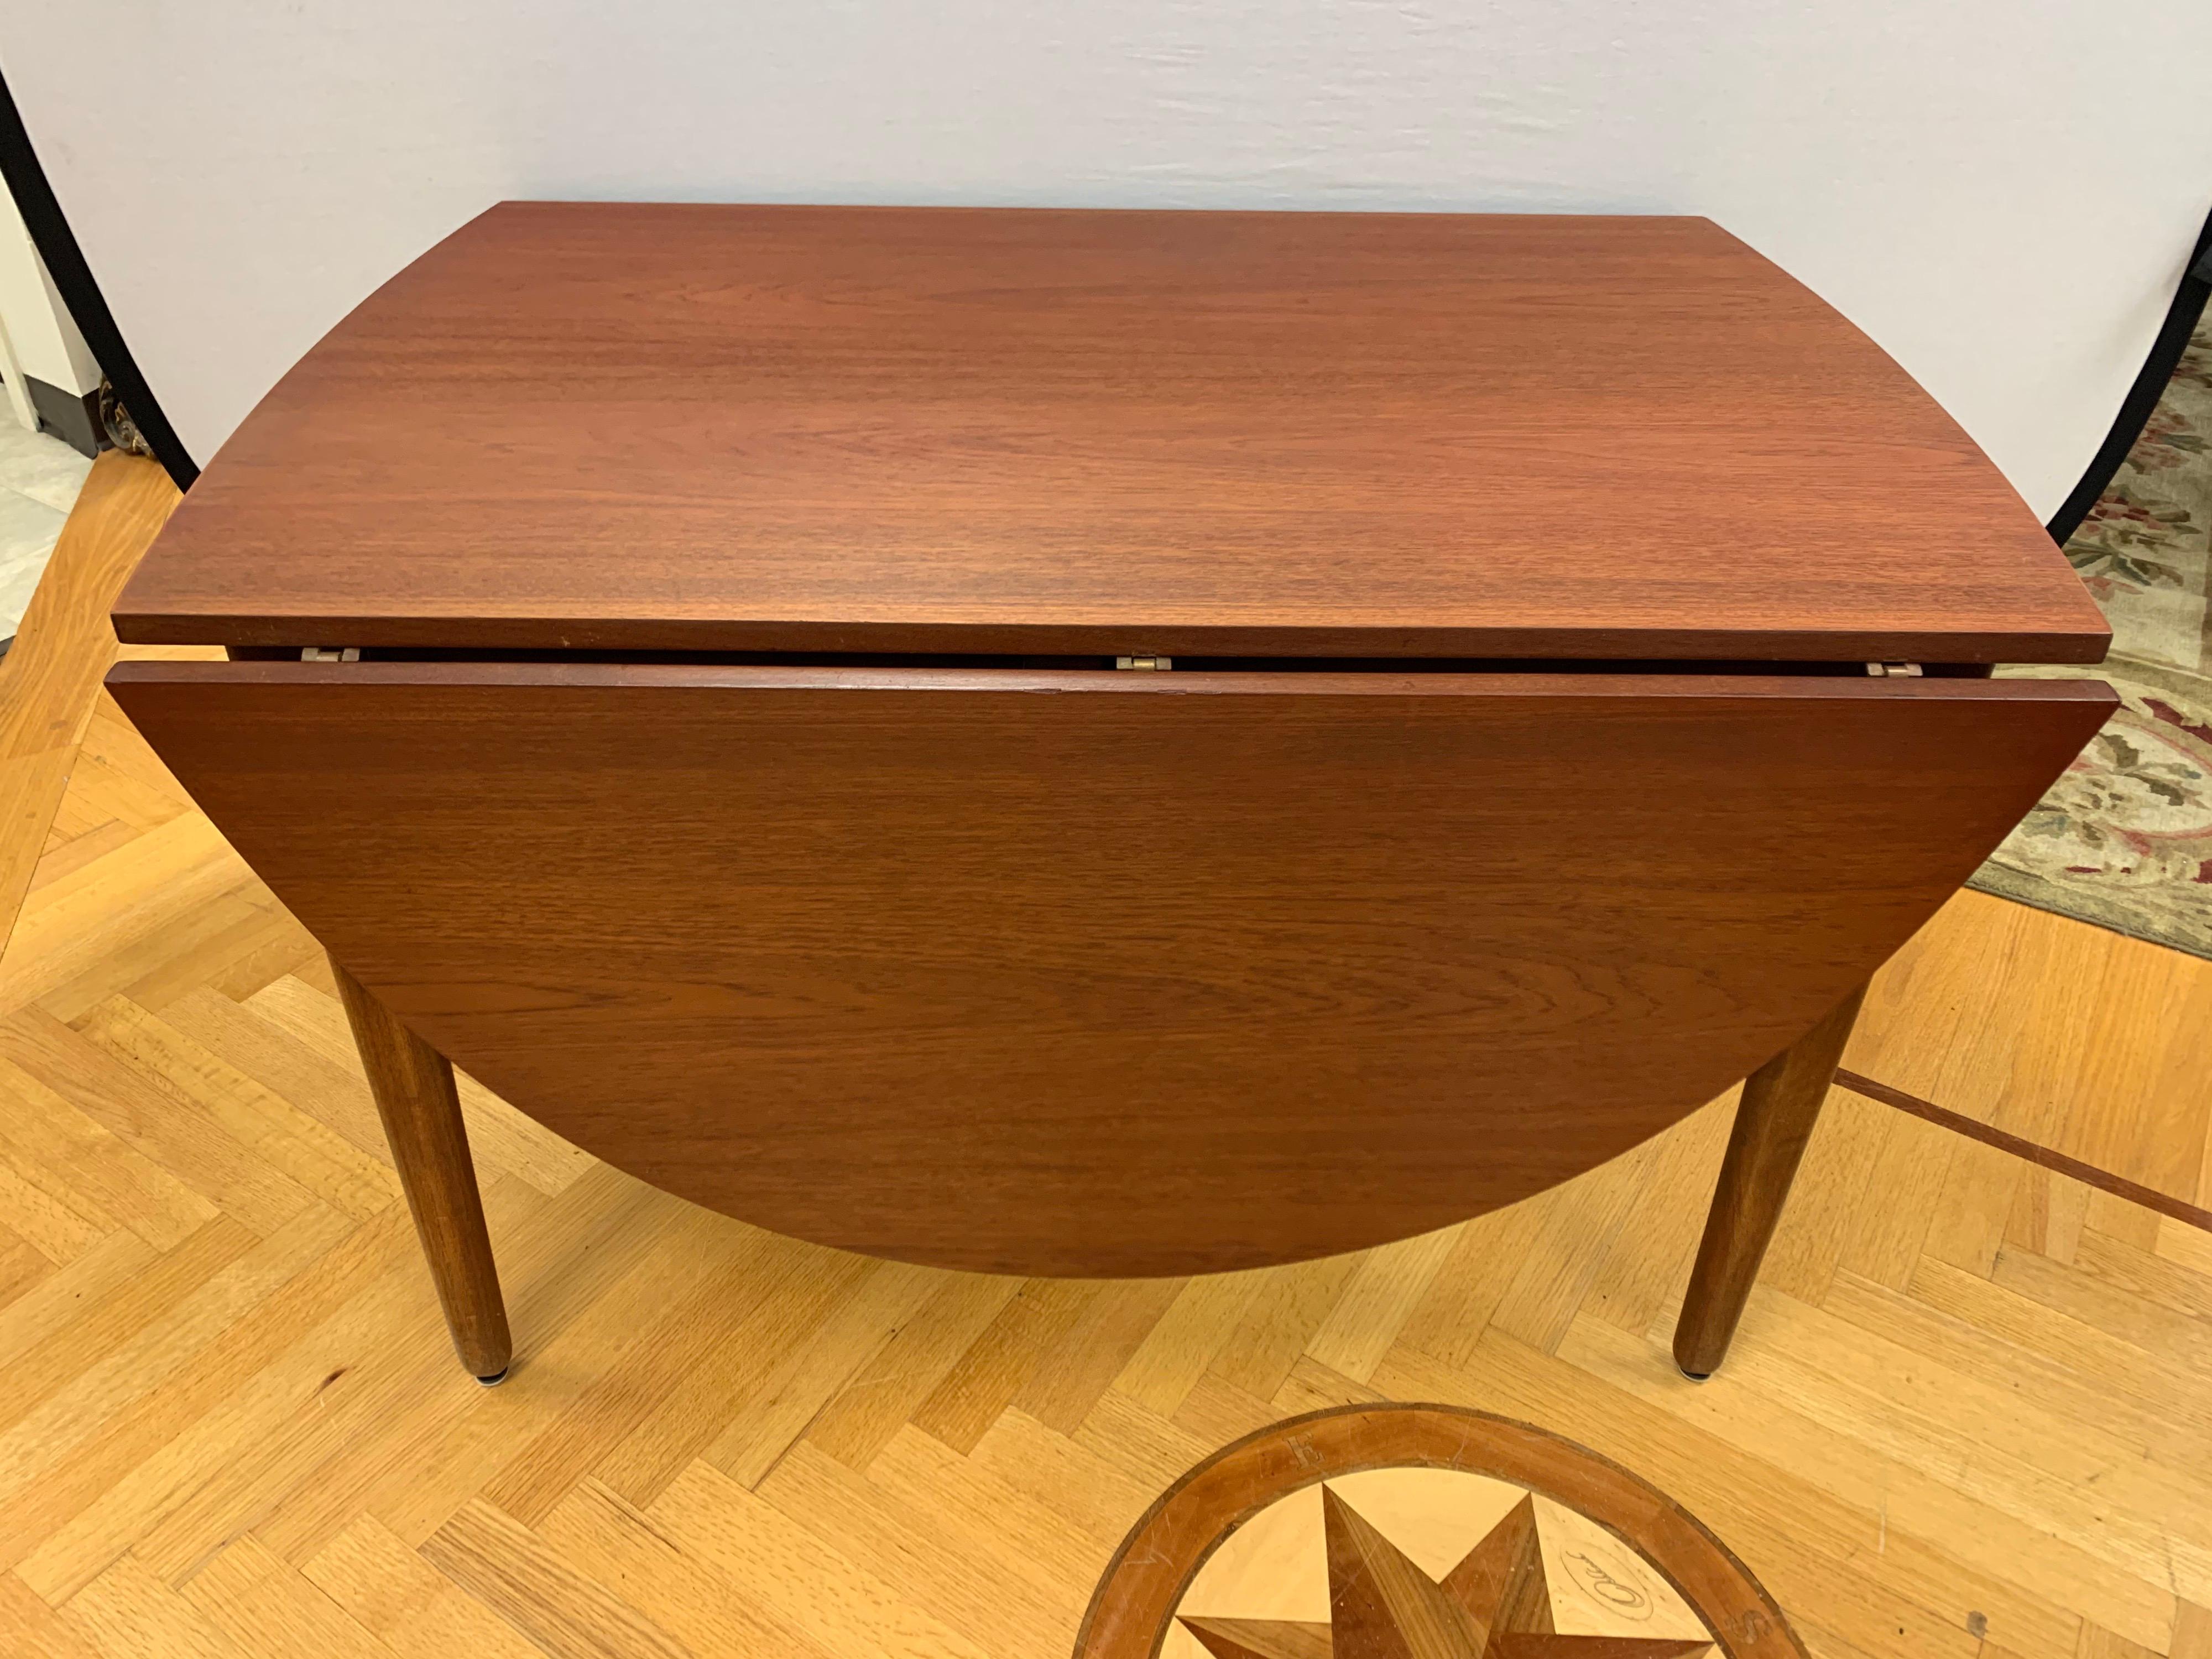 An ultra rare signed Arne Vodder and Anton Borg teak drop leaf dining table. Perfect for
a small space or apartment. The dimensions are when the table is expanded and both leaves are up.

About Arne Vodder:

Arne Vodder originally trained as both an